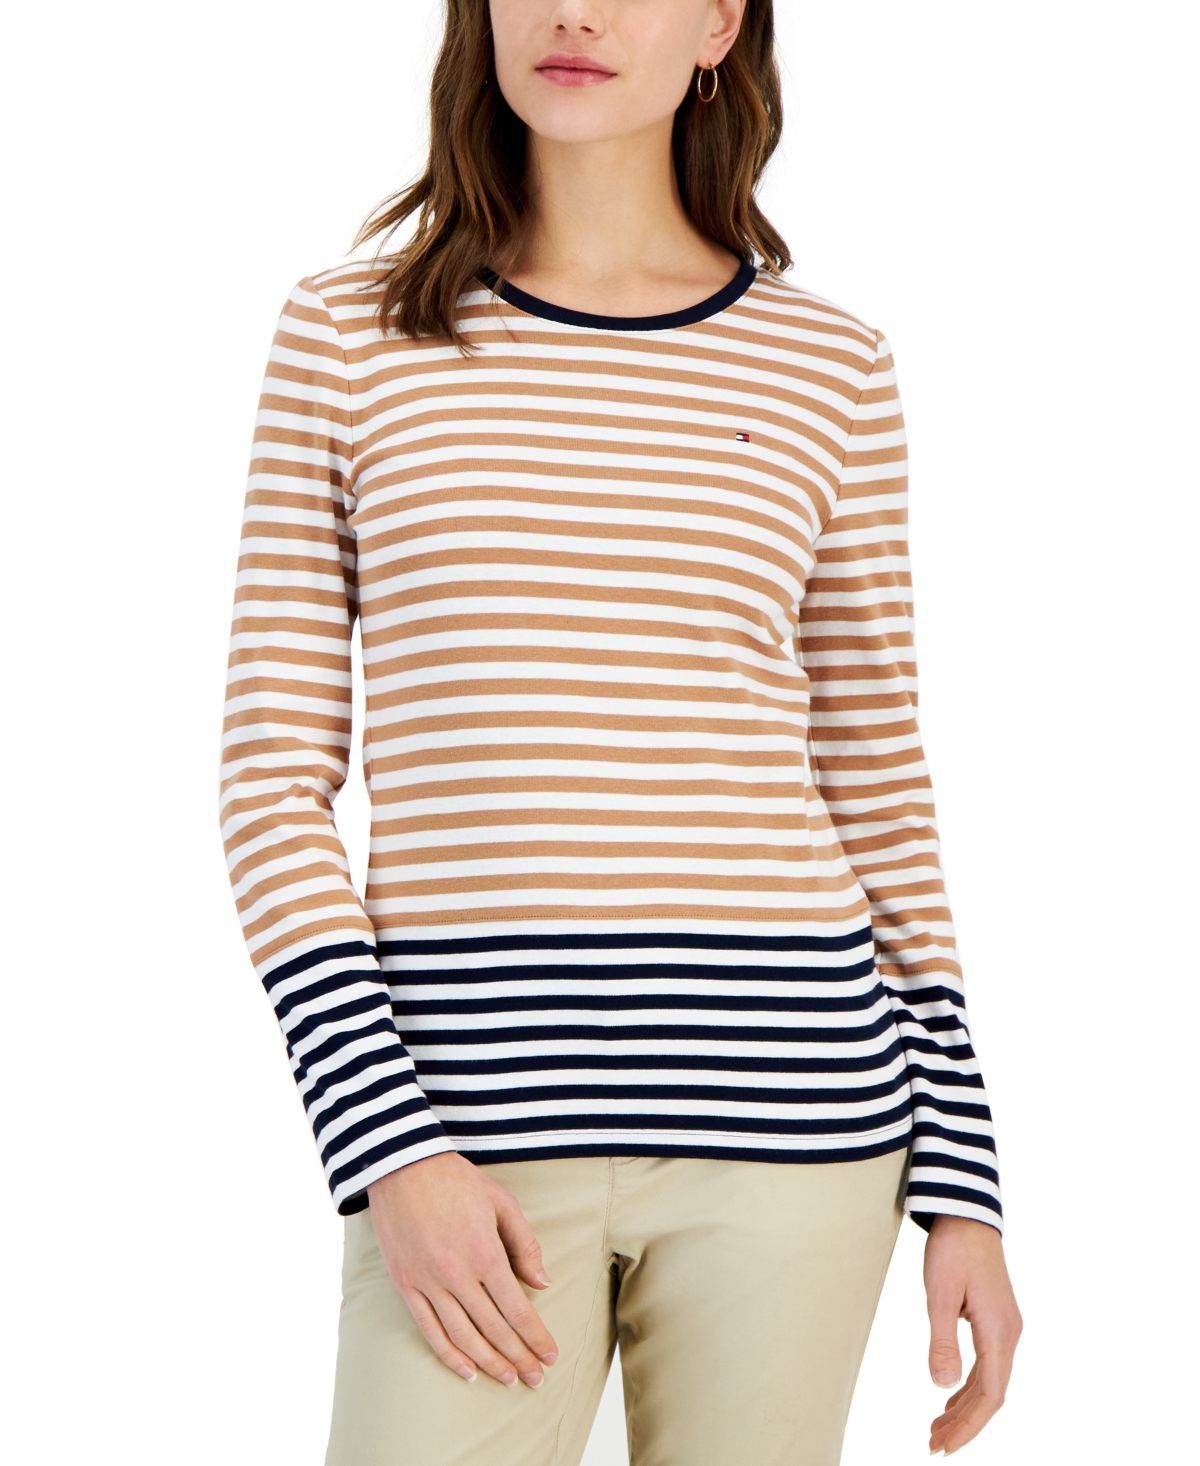 Tommy Hilfiger Women's Cotton Colorblocked Striped Top In Brown Sugar,bright White